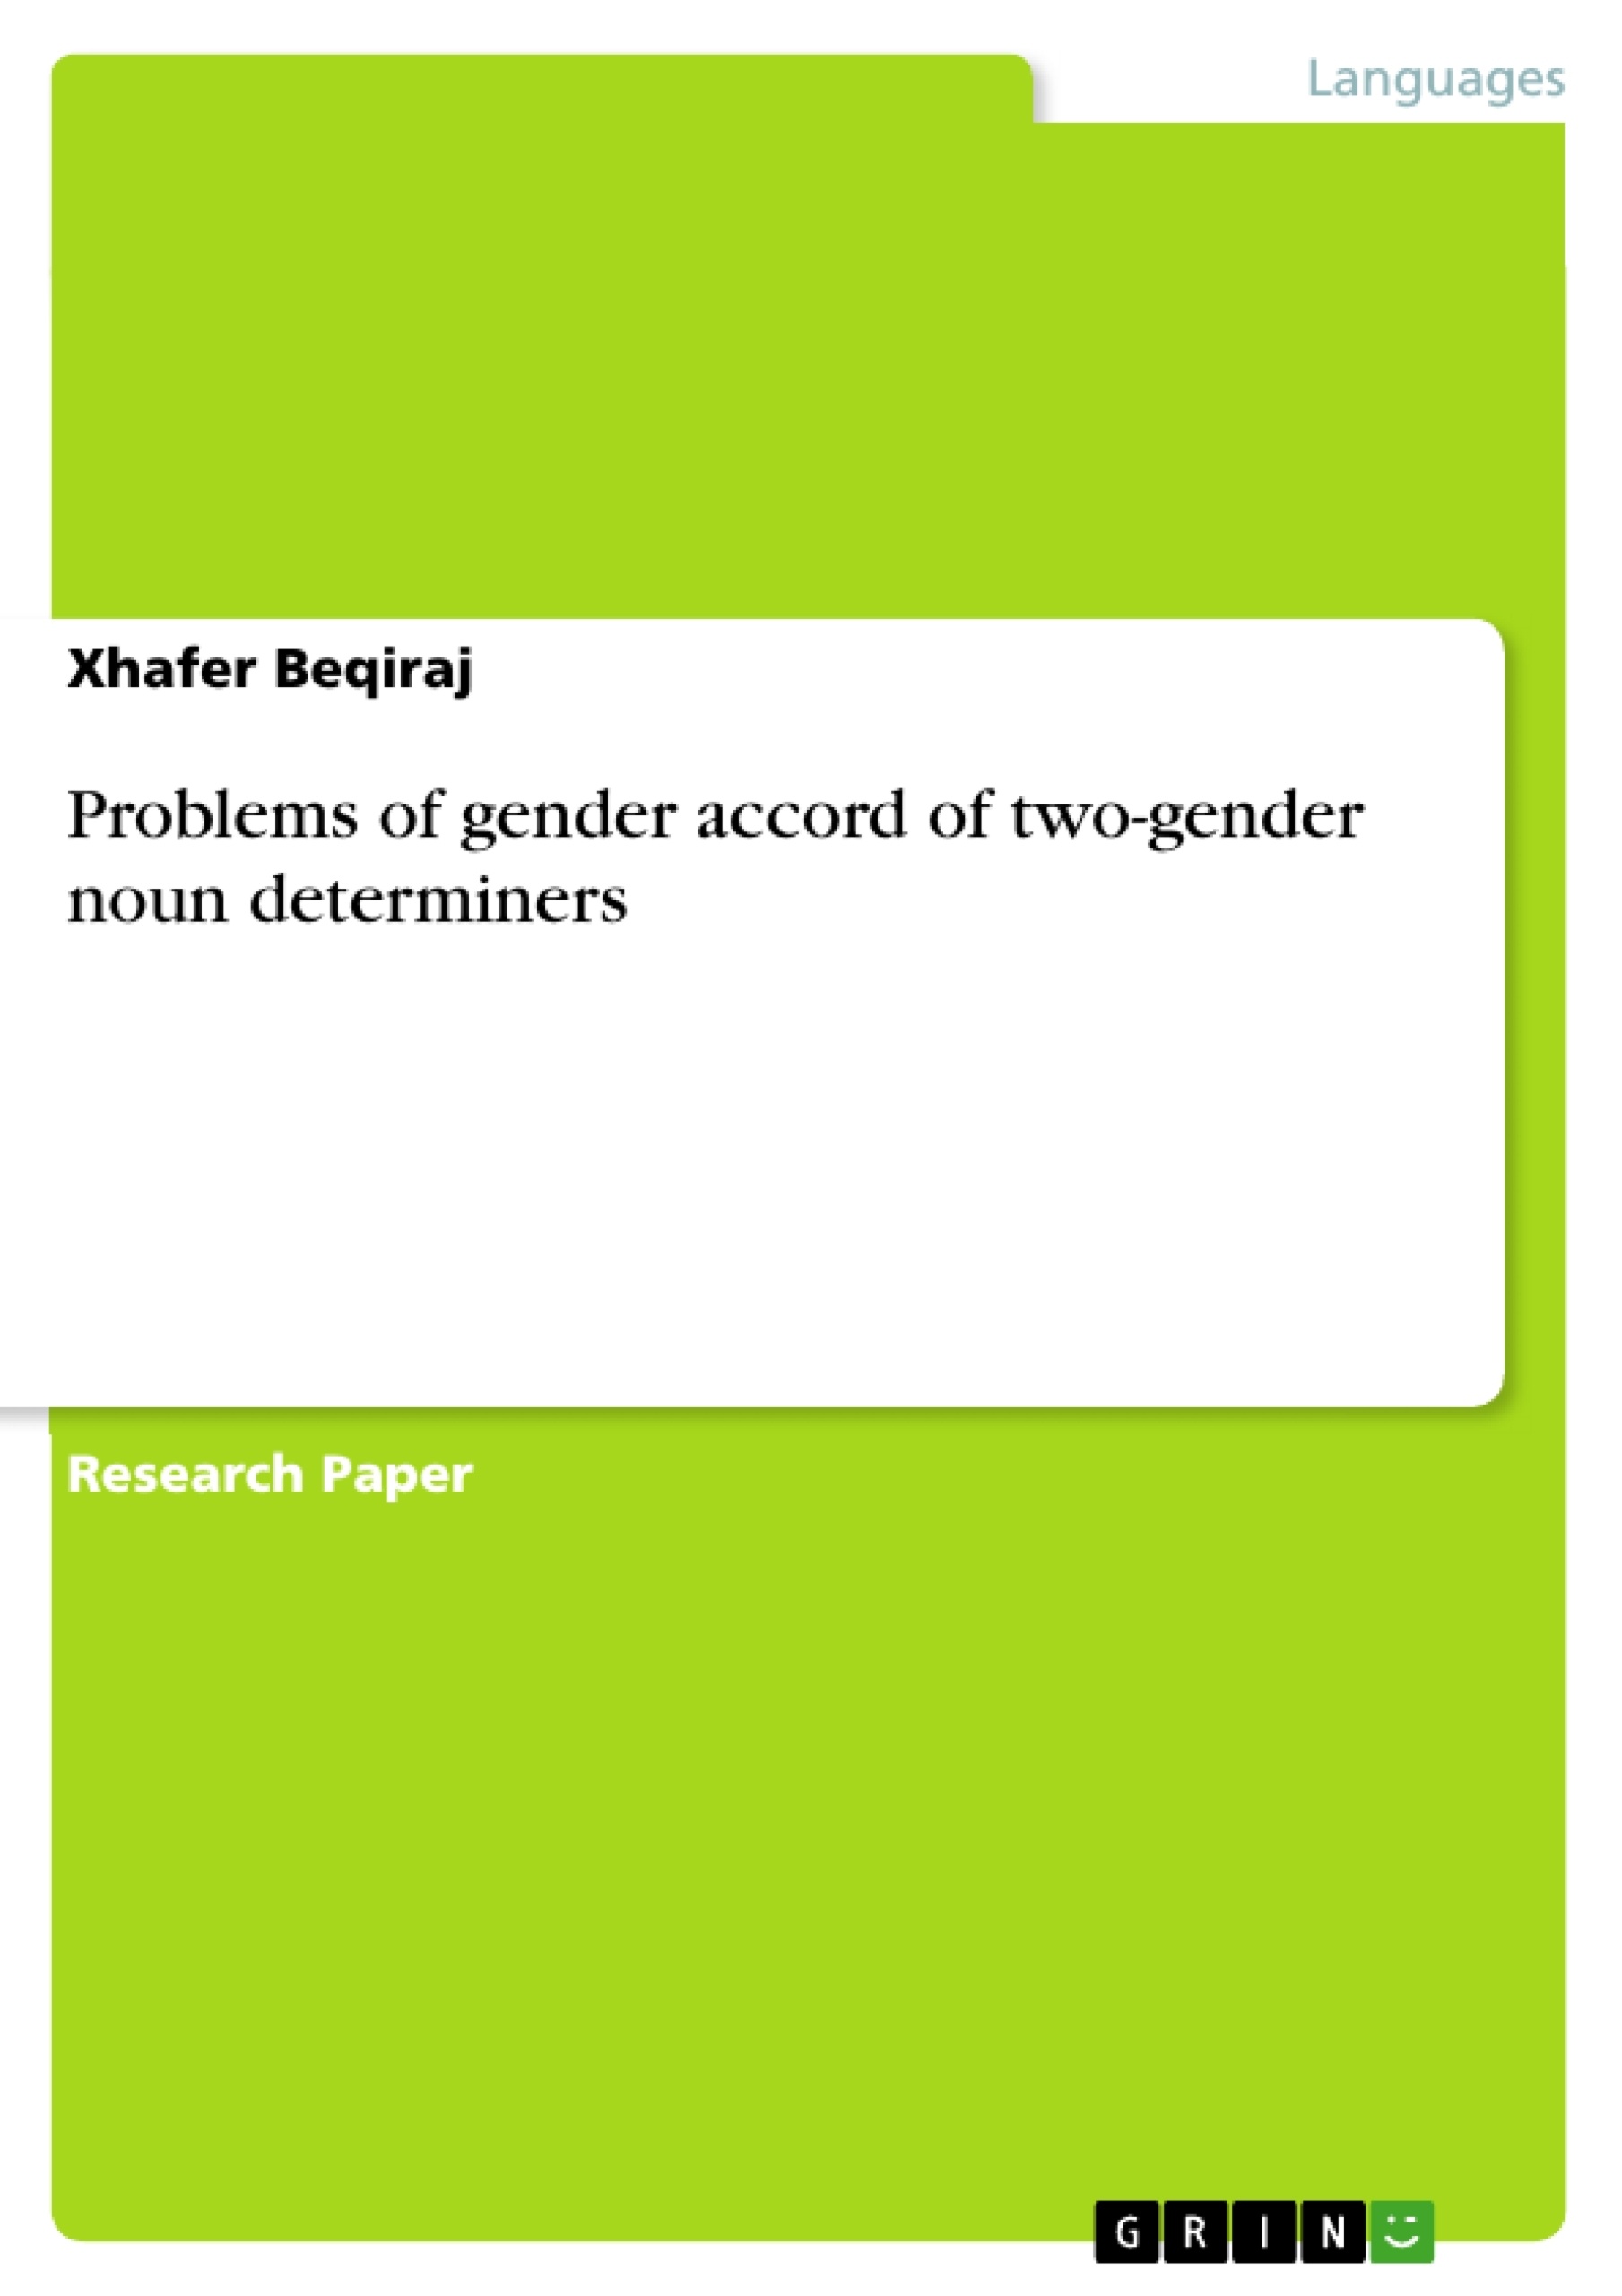 Title: Problems of gender accord of two-gender noun determiners